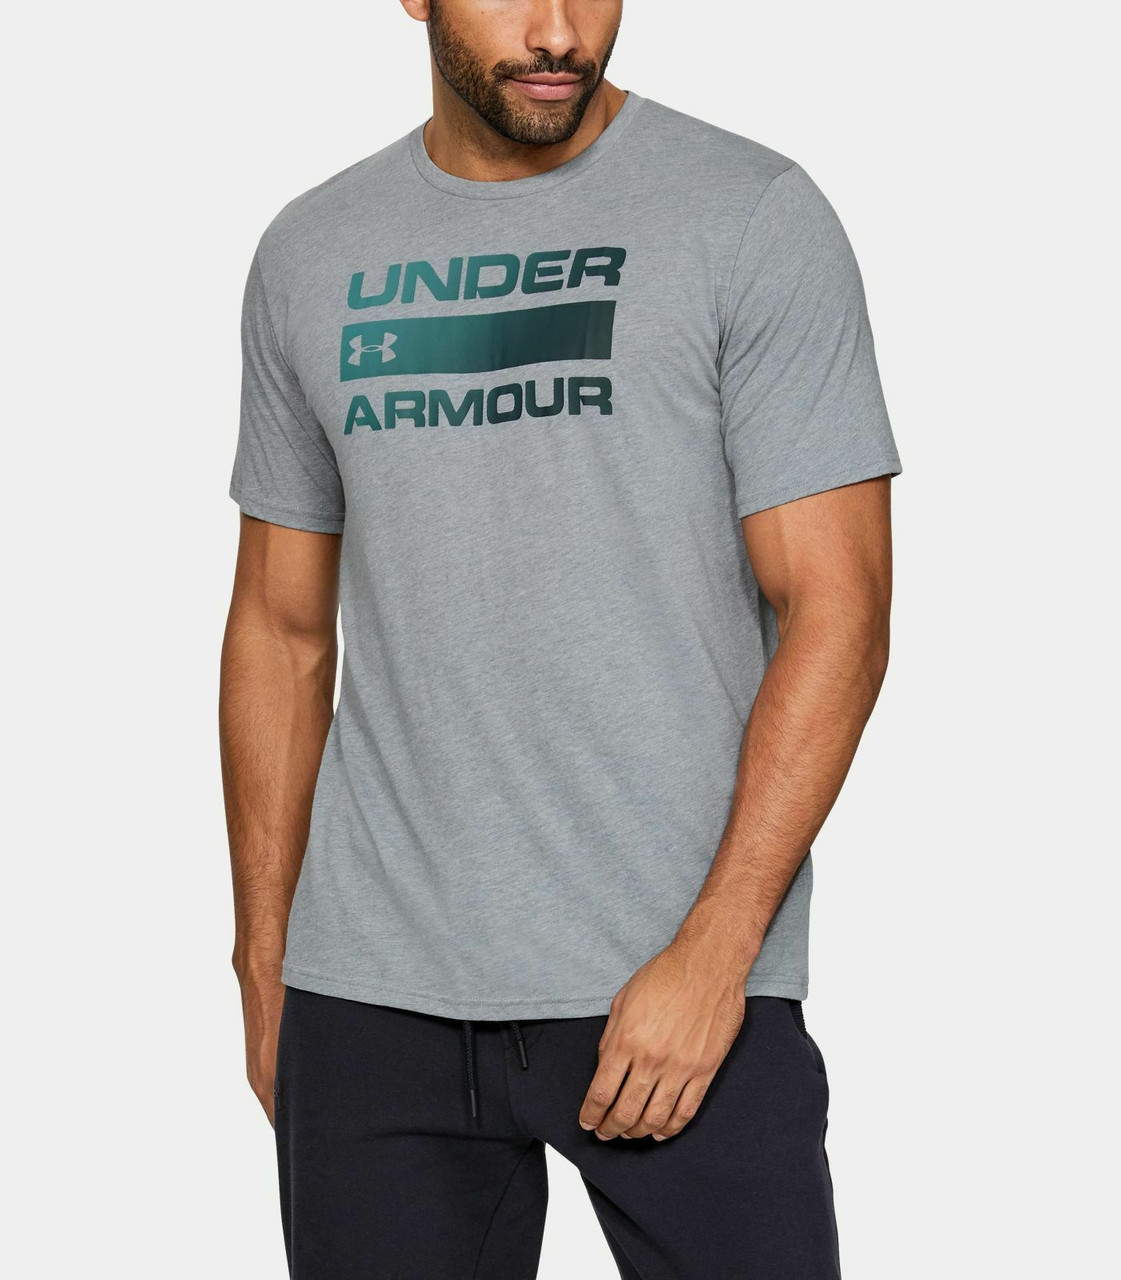 Under Armour Men's Team Issue Wordmark Short Sleeve T-Shirt Tee - 1329582 -  Knockout Wear, Lifestyle Clothing, Shoes and Accessories